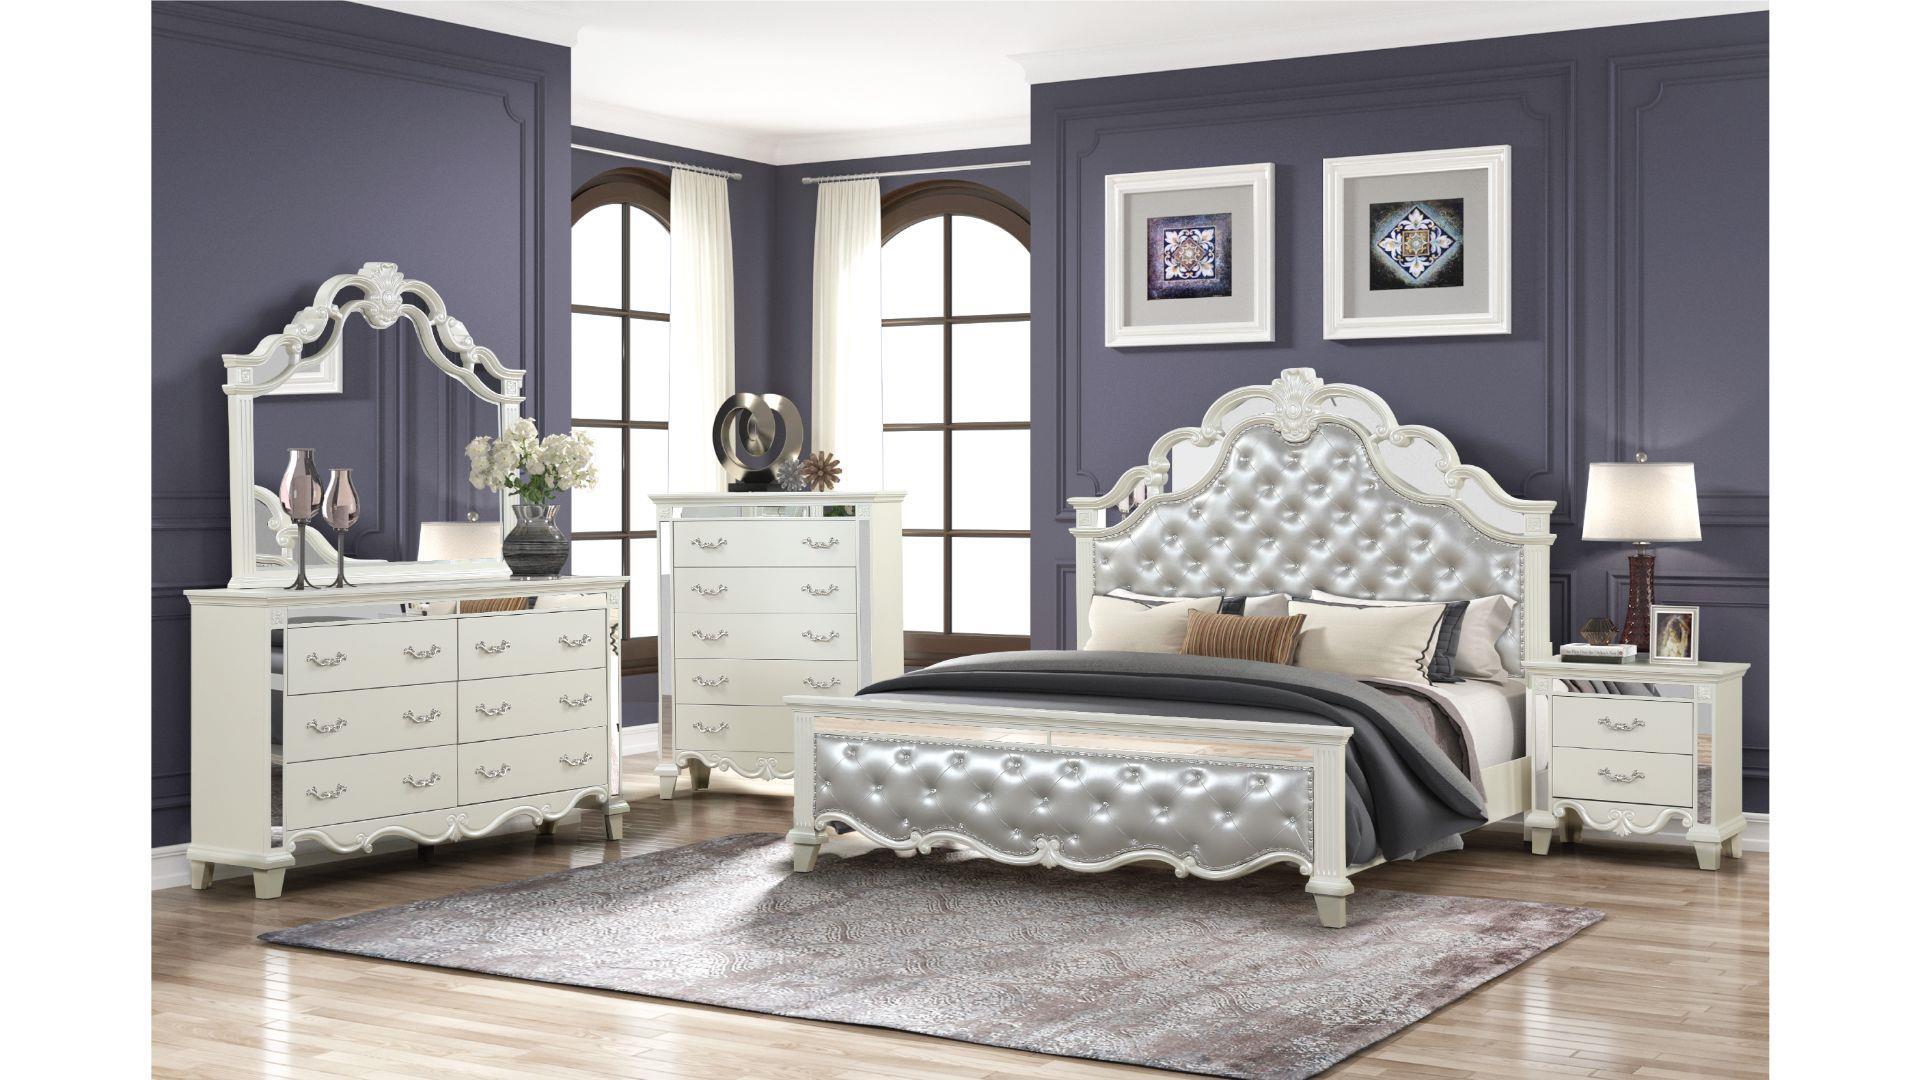 

    
Milky White Tufted Queen Bedroom Set 5P MILAN Galaxy Home Contemporary Modern
